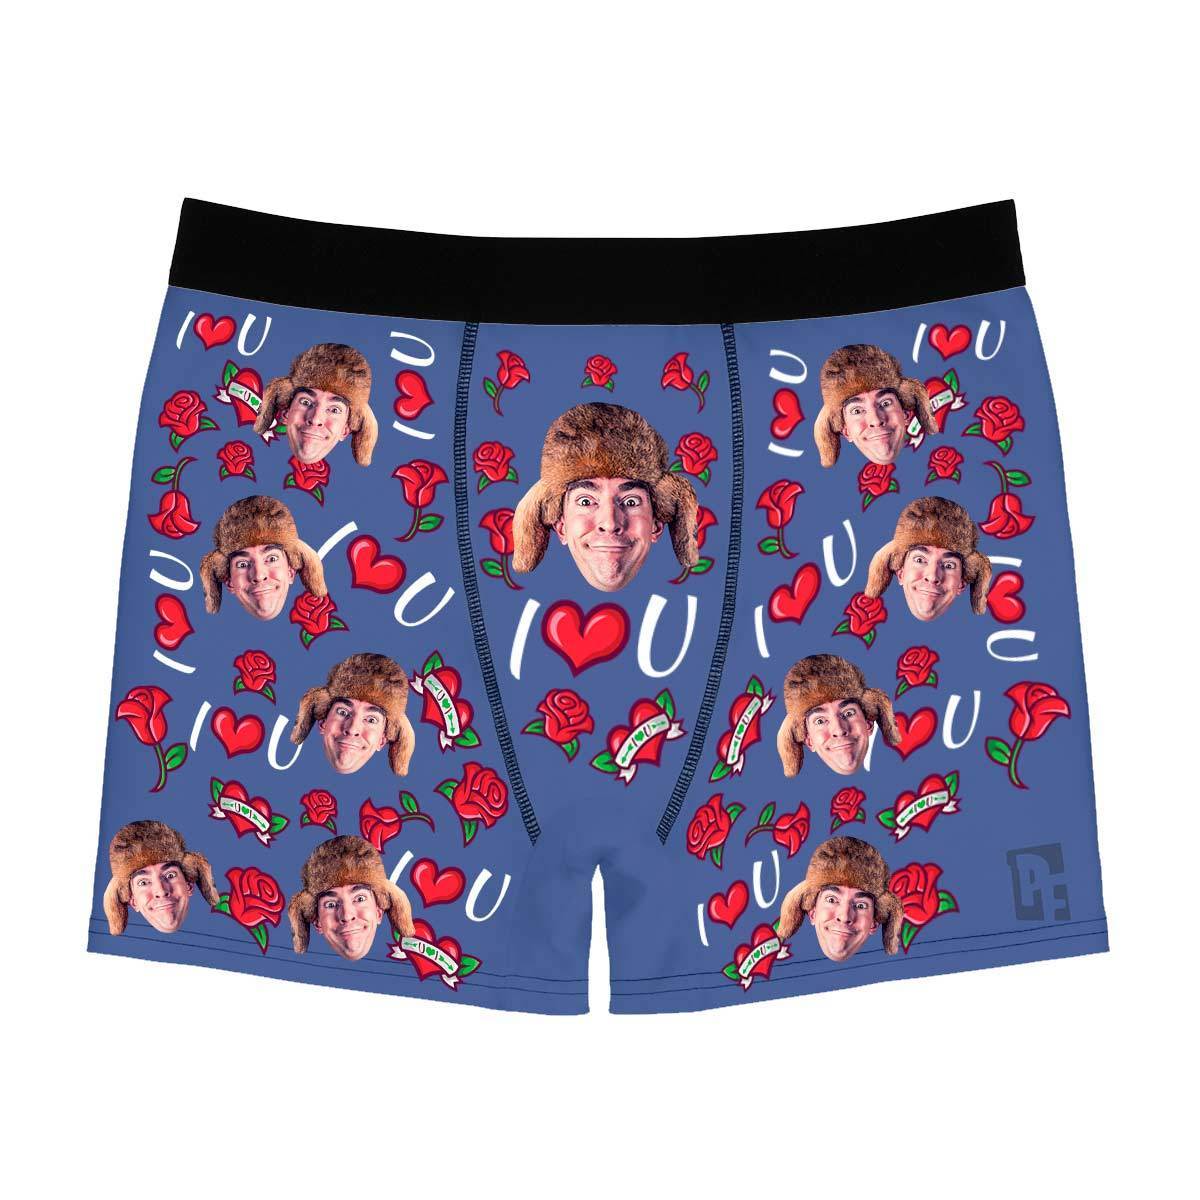 Darkblue Valentines men's boxer briefs personalized with photo printed on them